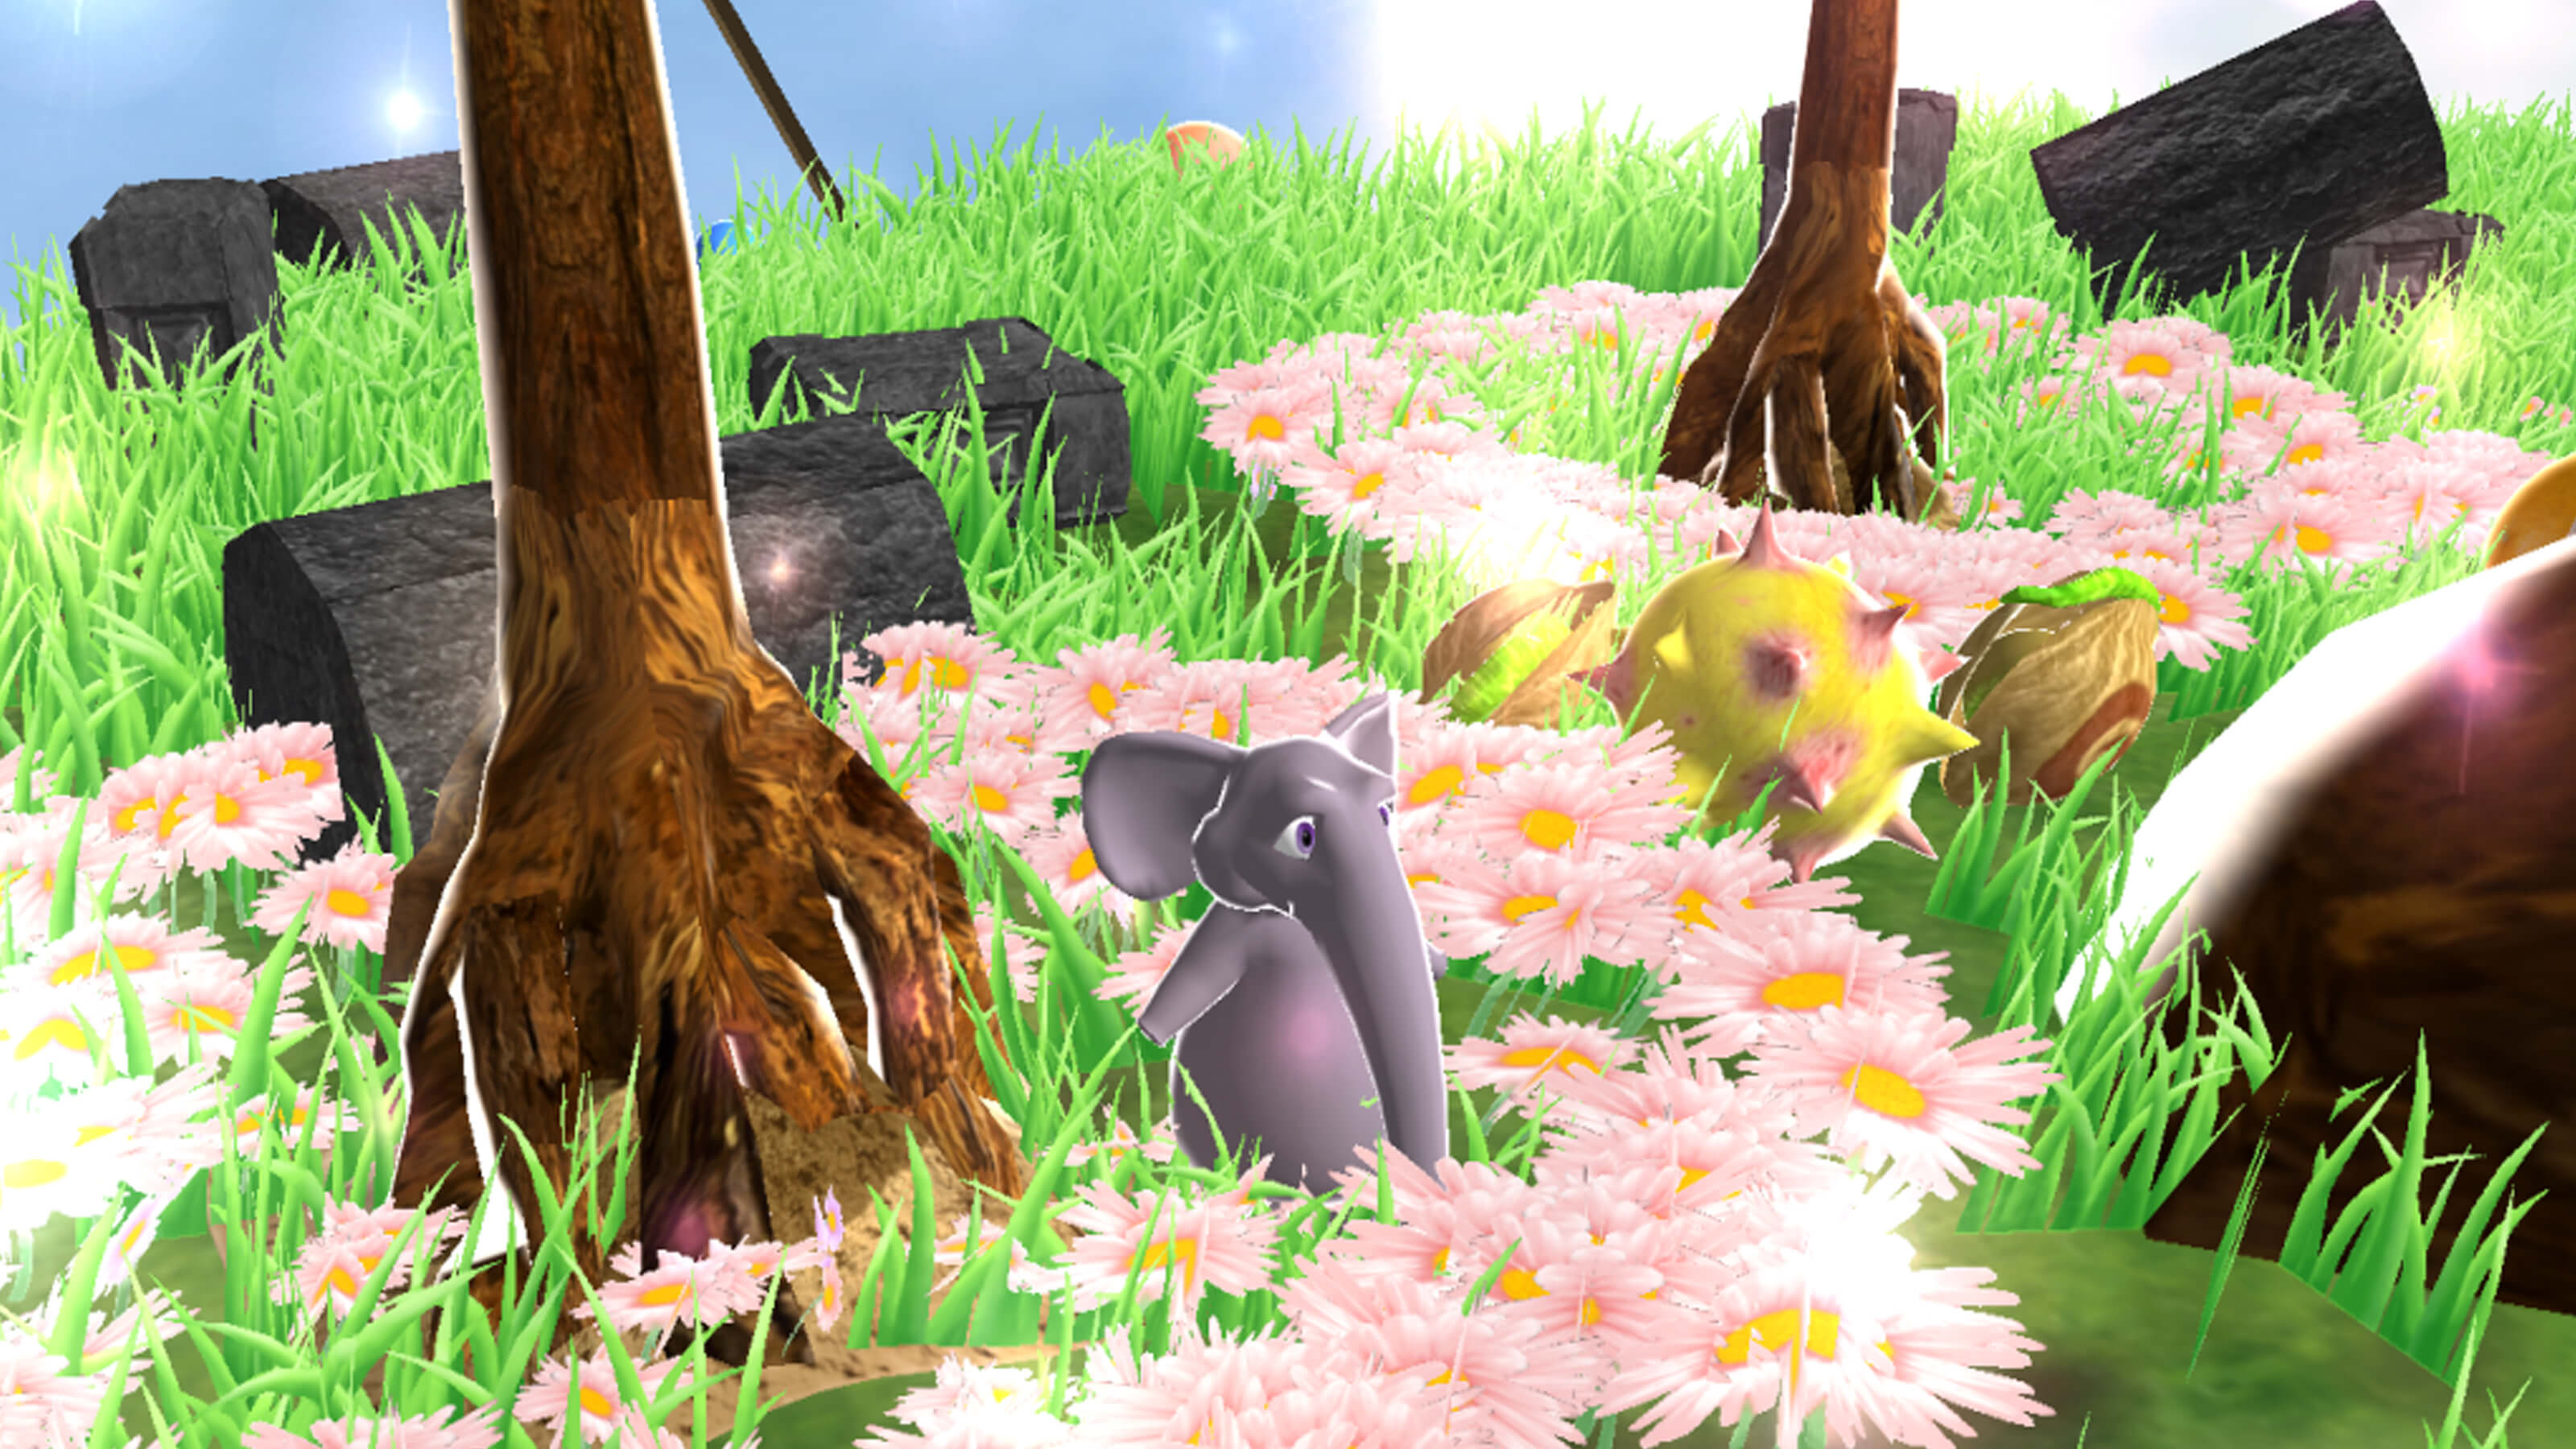 An elephant stands in a field of pink flowers.